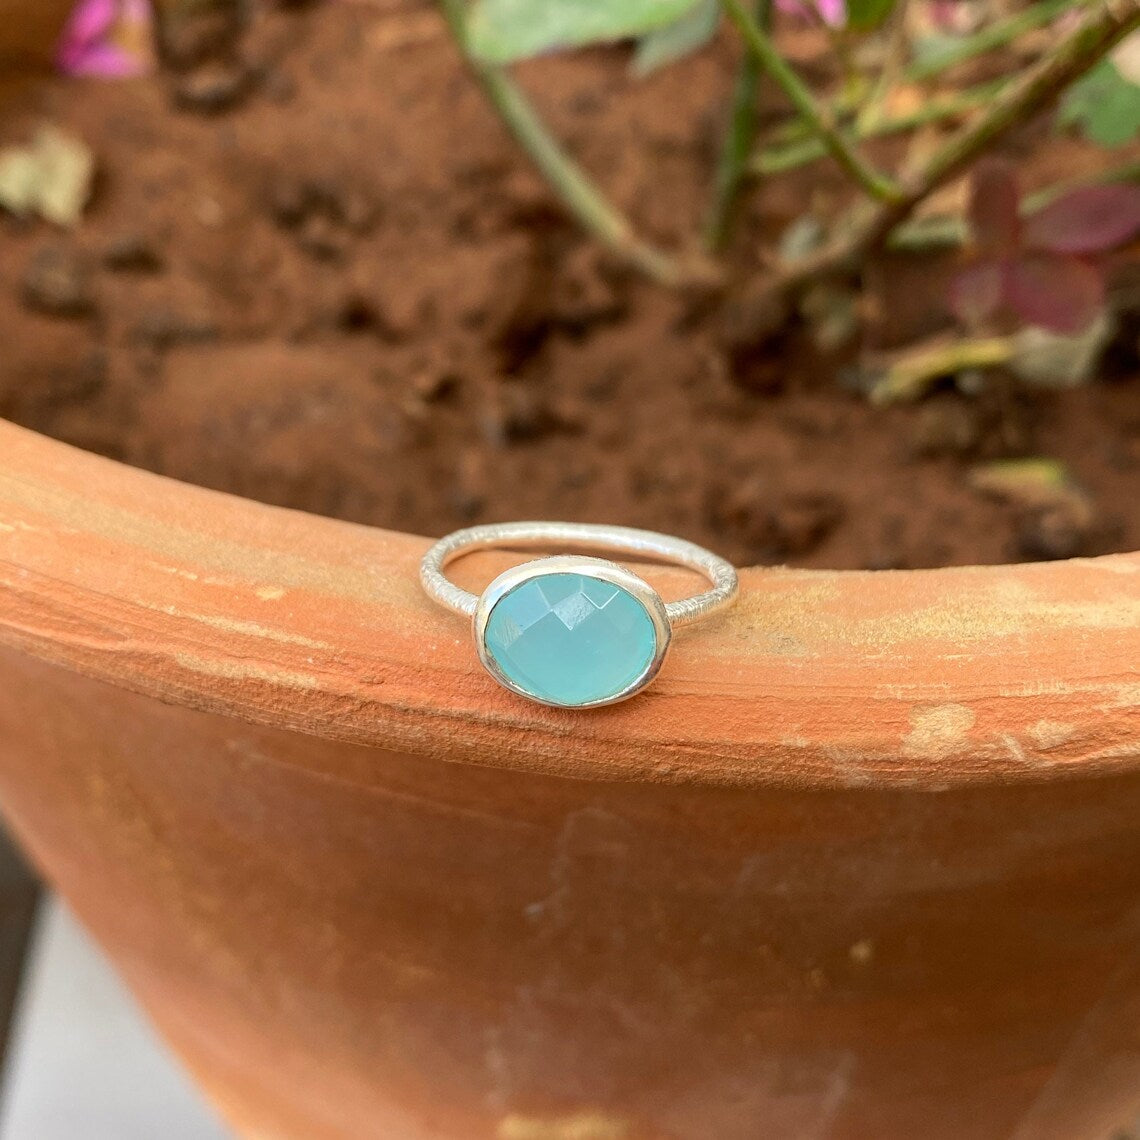 Scratched Band Ring - Blue chalcedony Oval Shape Sterling Silver Ring